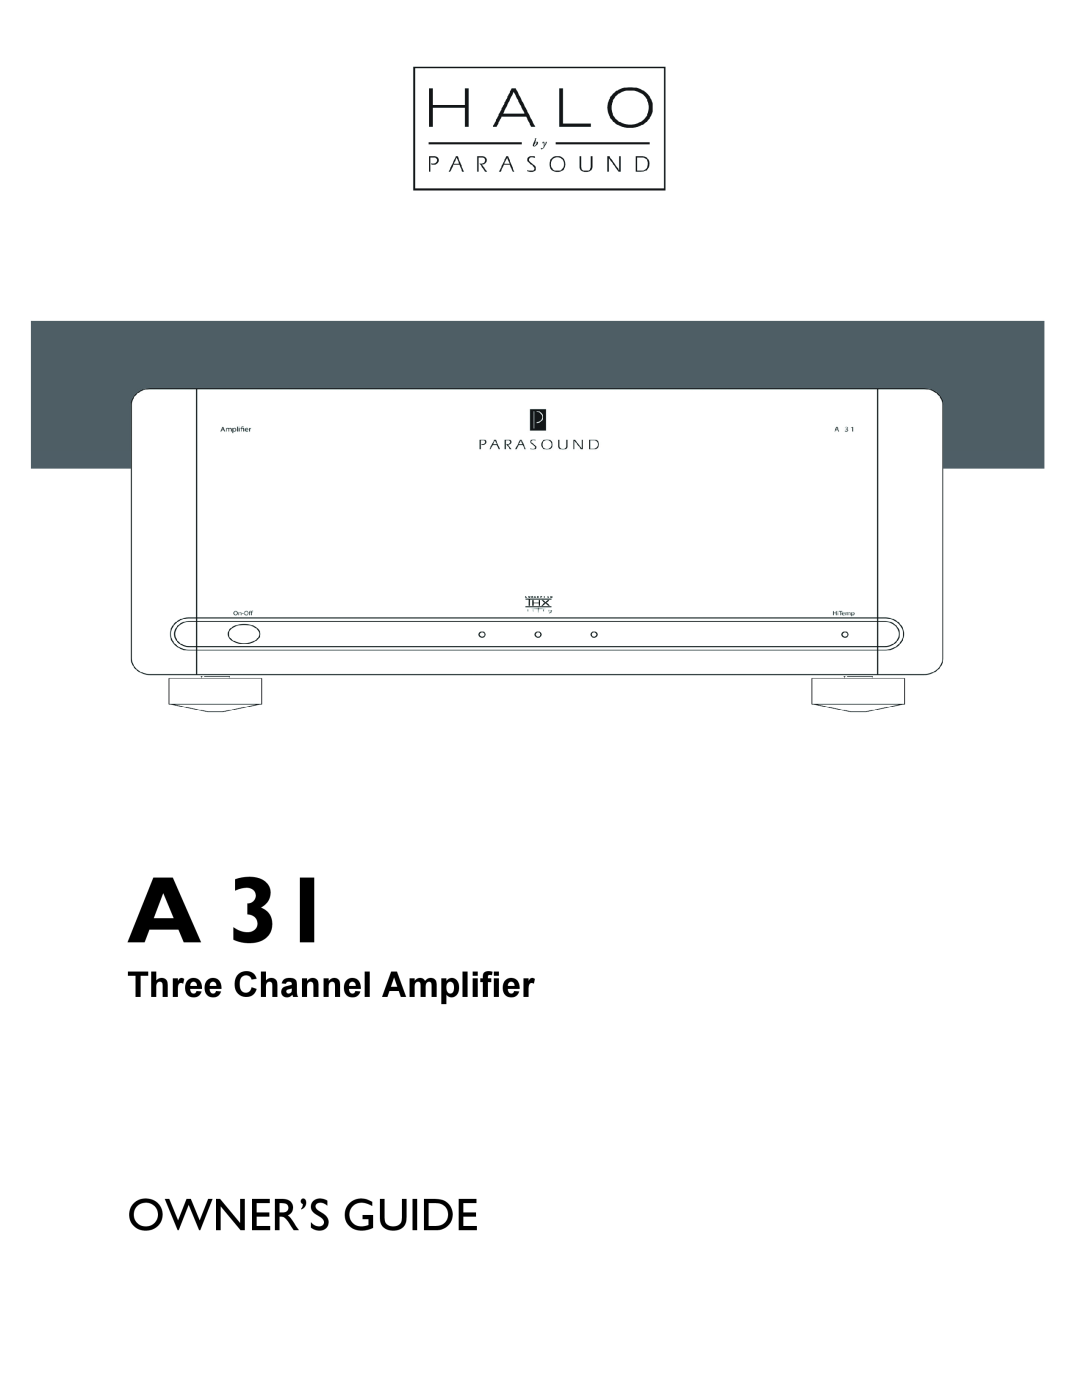 Parasound A 31 manual Owner’S Guide, Three Channel Amplifier 